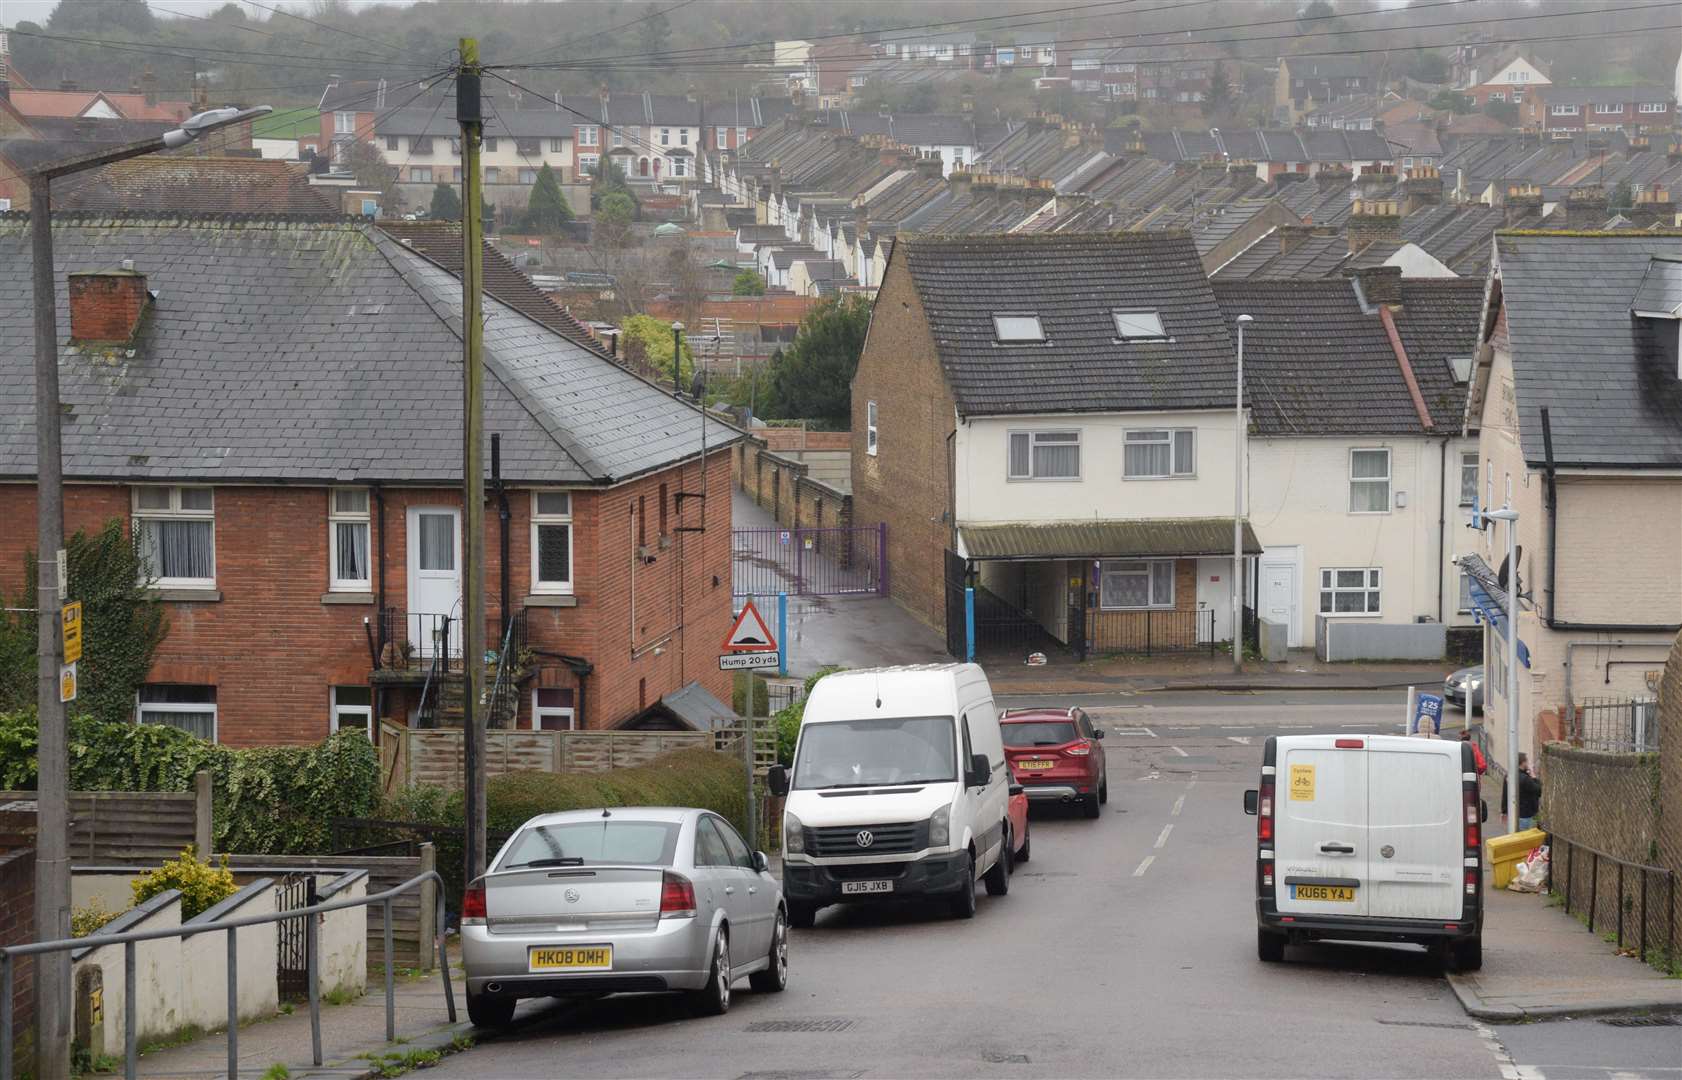 The Luton area is one of the most deprived in Medway